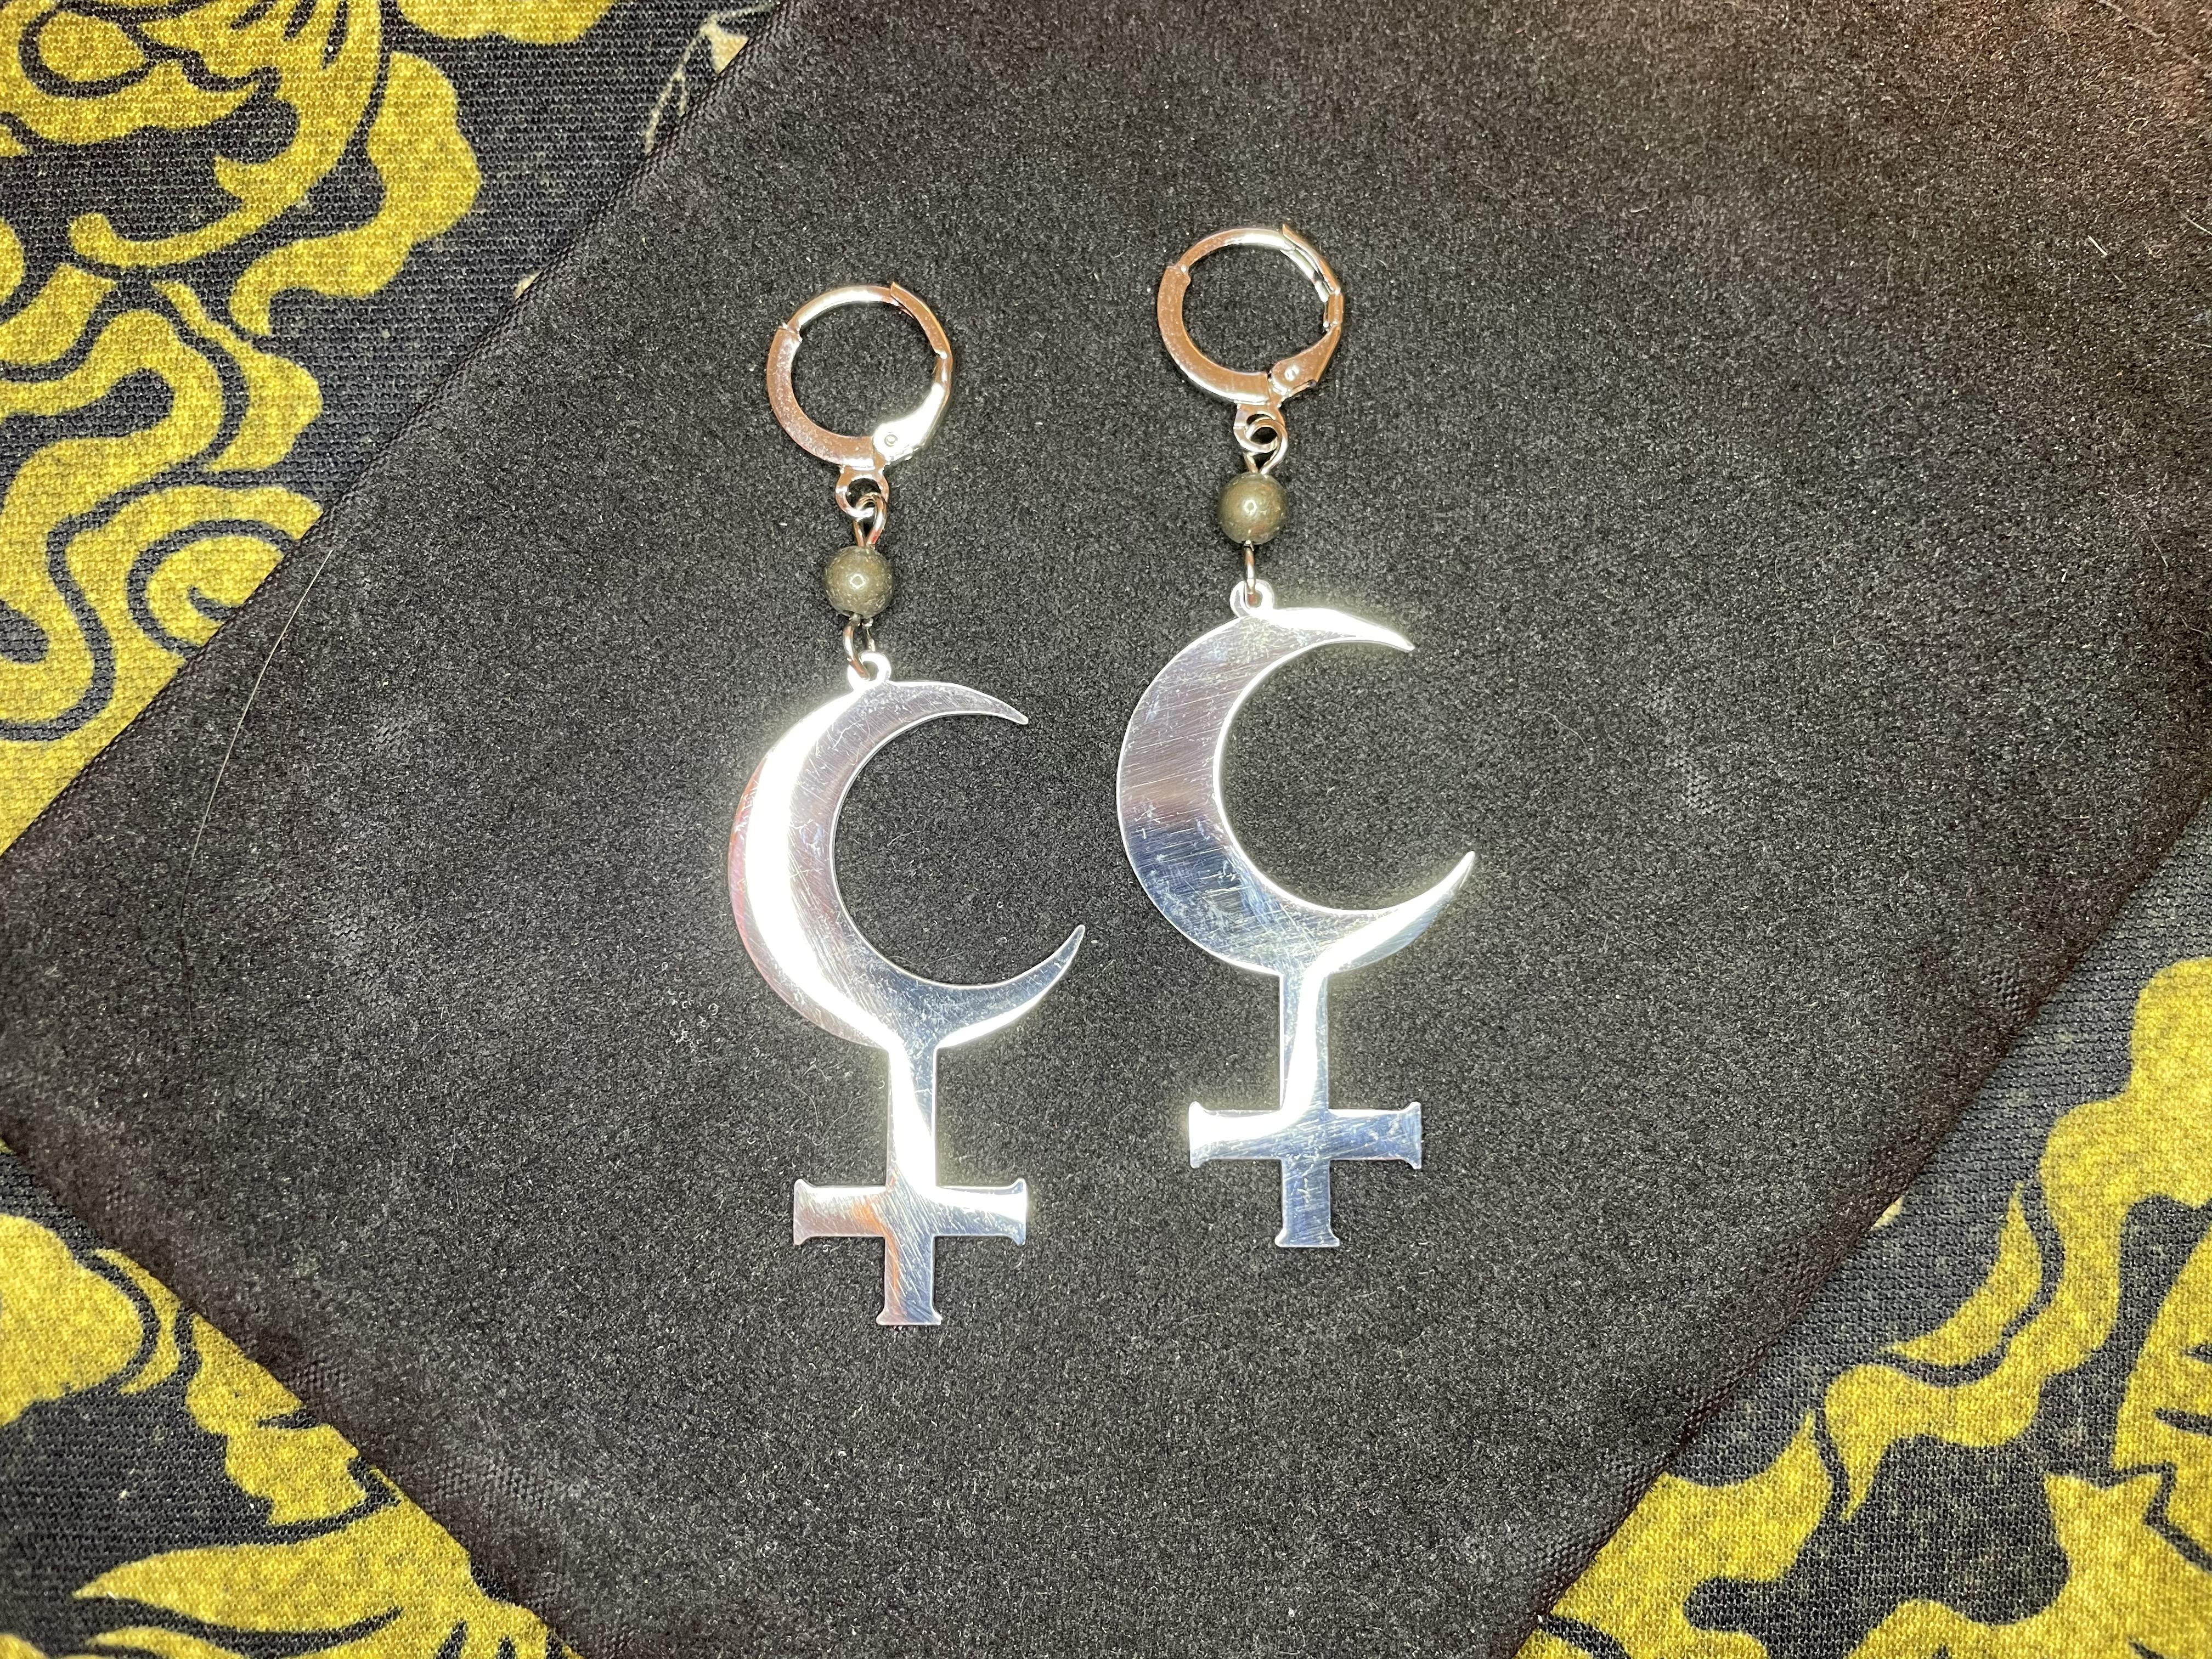 lilith symbol crescent moon inverted upside down cross stainless steel earrings